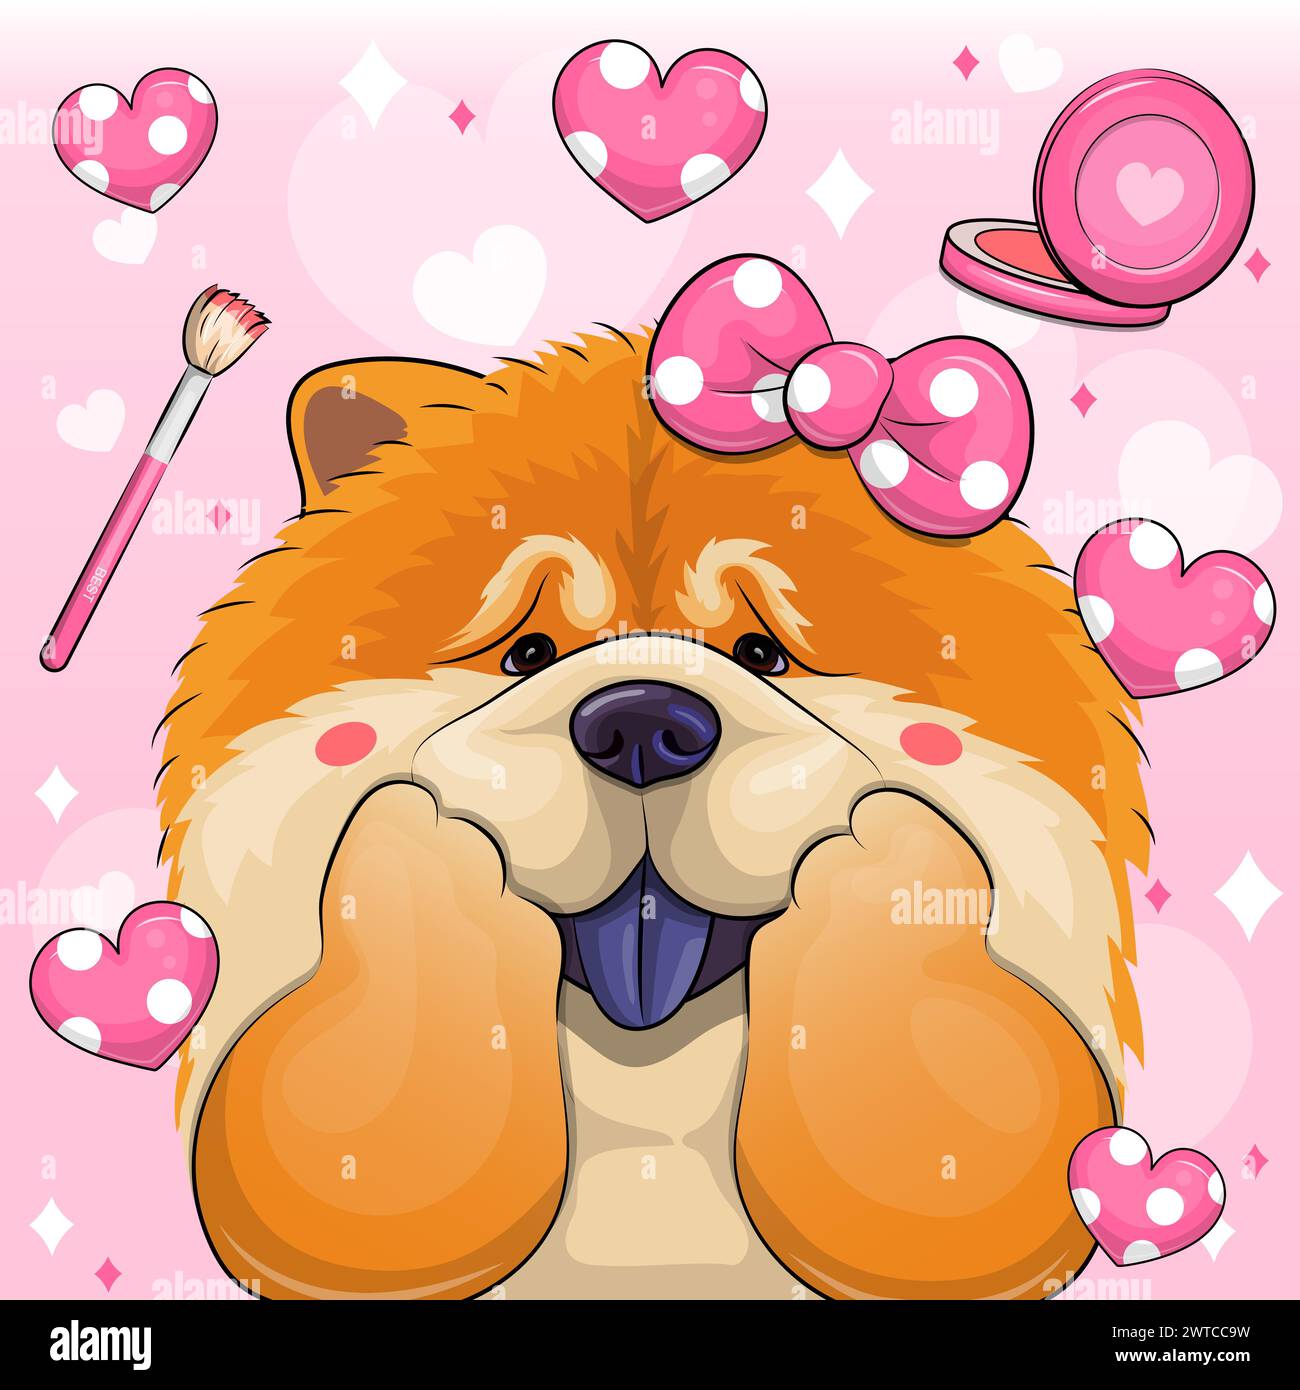 Cute cartoon chow chow dog with hair bow. Vector illustration of animal with blush and brush on pink background and heart. Stock Vector